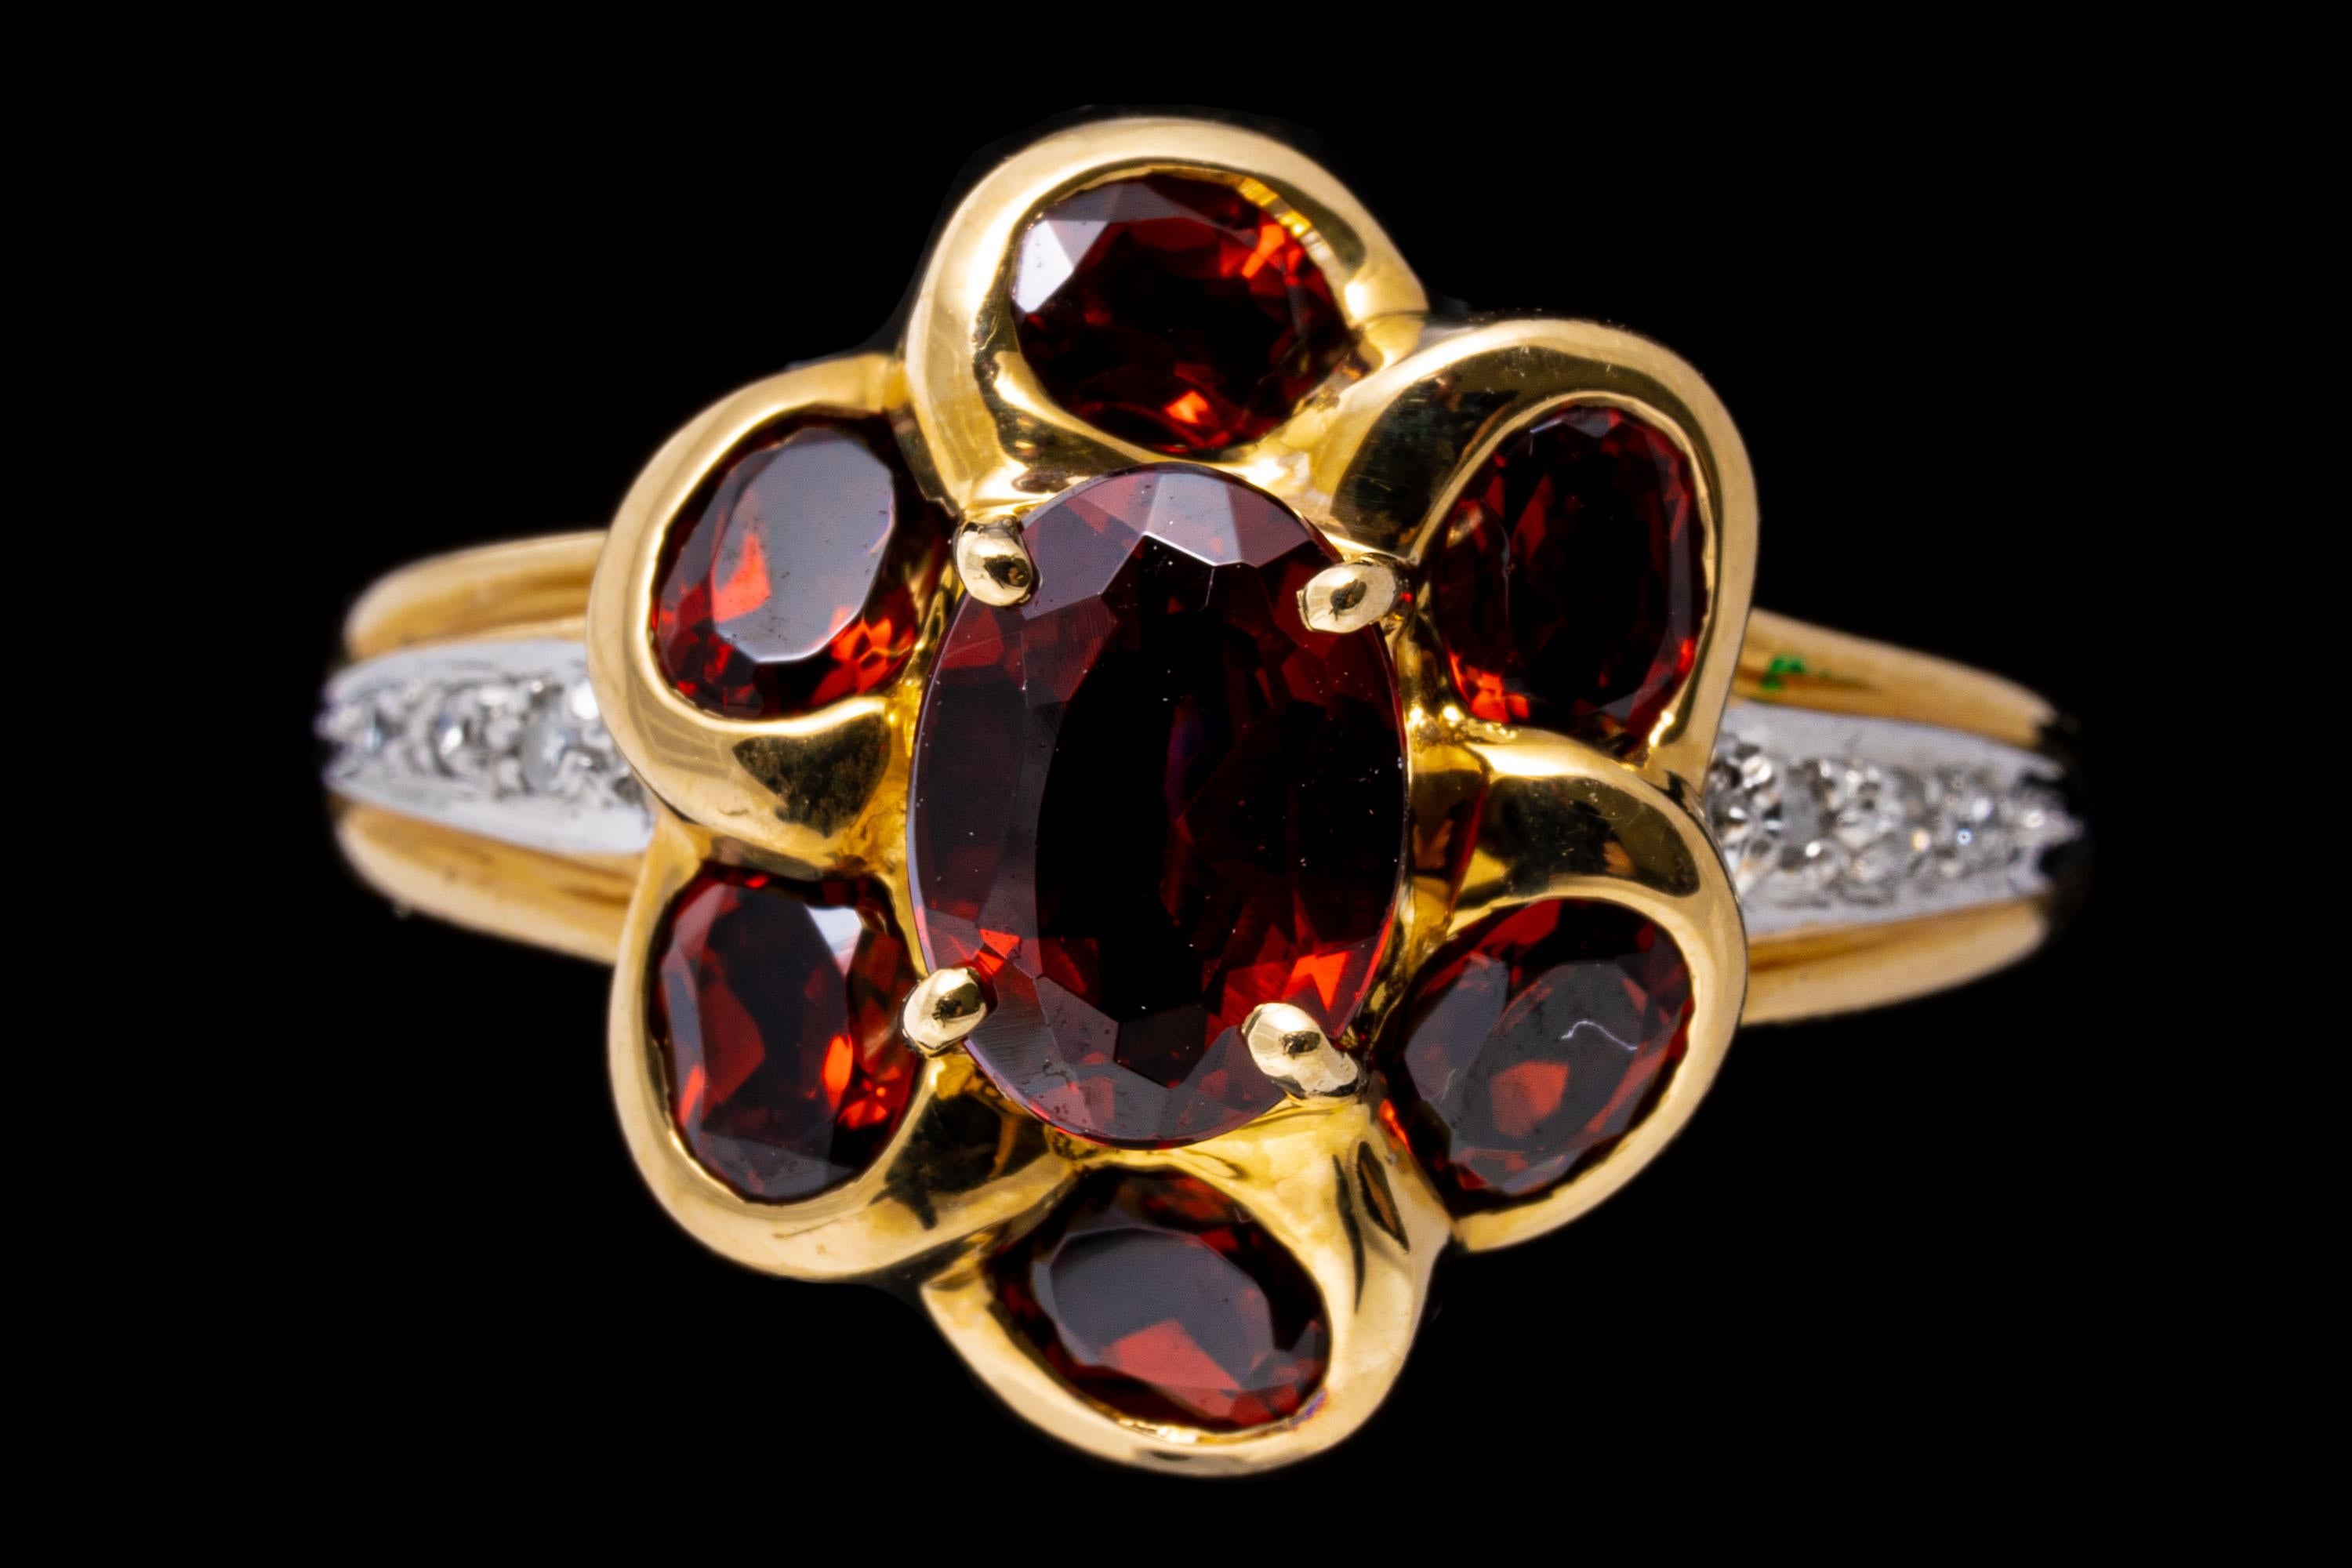 14k yellow gold ring. This lovely flower cluster ring features an oval faceted, burgundy garnet center, approximately 0.55 TCW, prong set, surrounded by petals of oval faceted, burgundy color garnets, approximately 0.54 TCW. The center is flanked